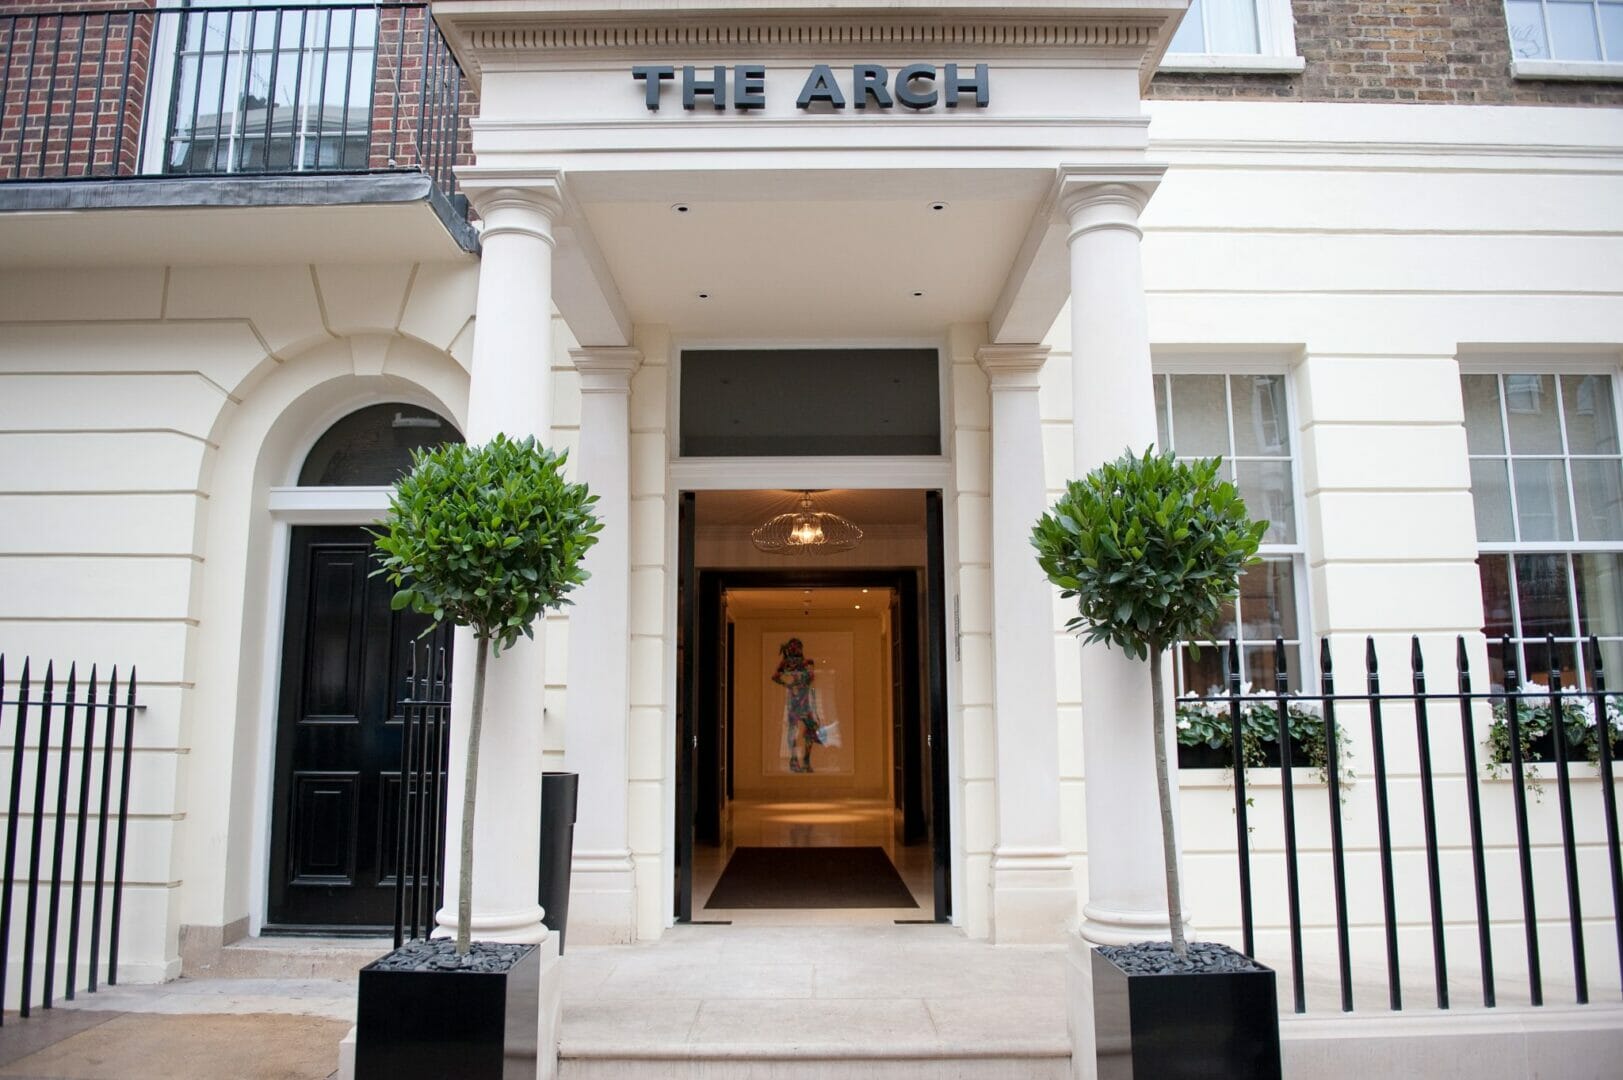 Family Fun Package at The Arch London